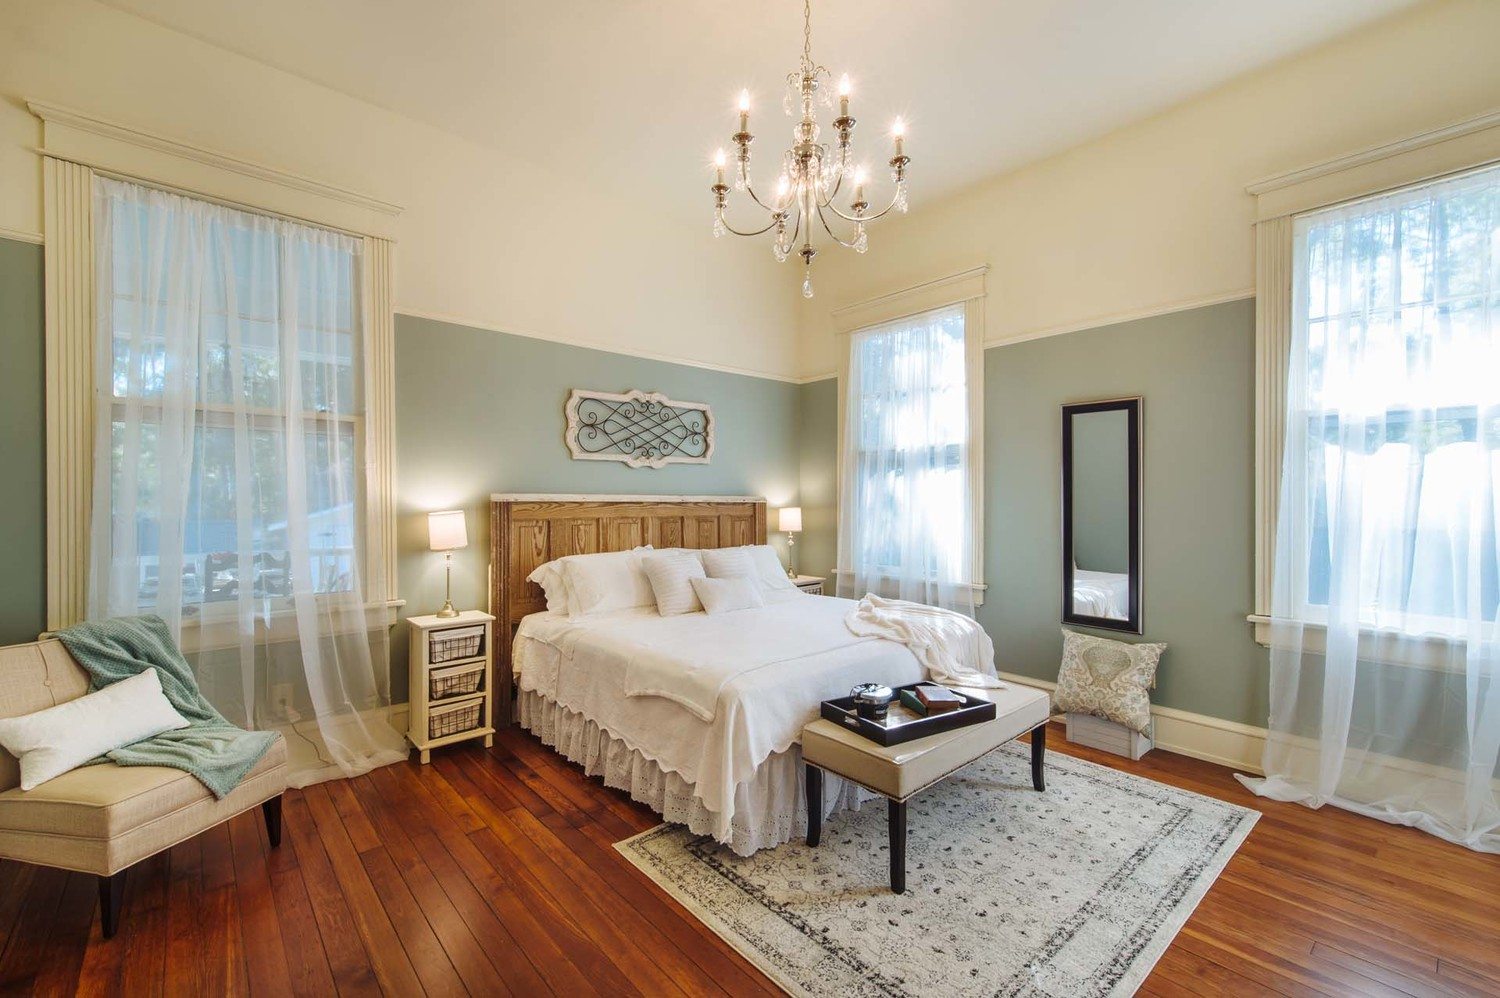 Master bedroom in the Southern Romance Phantom Screens idea home